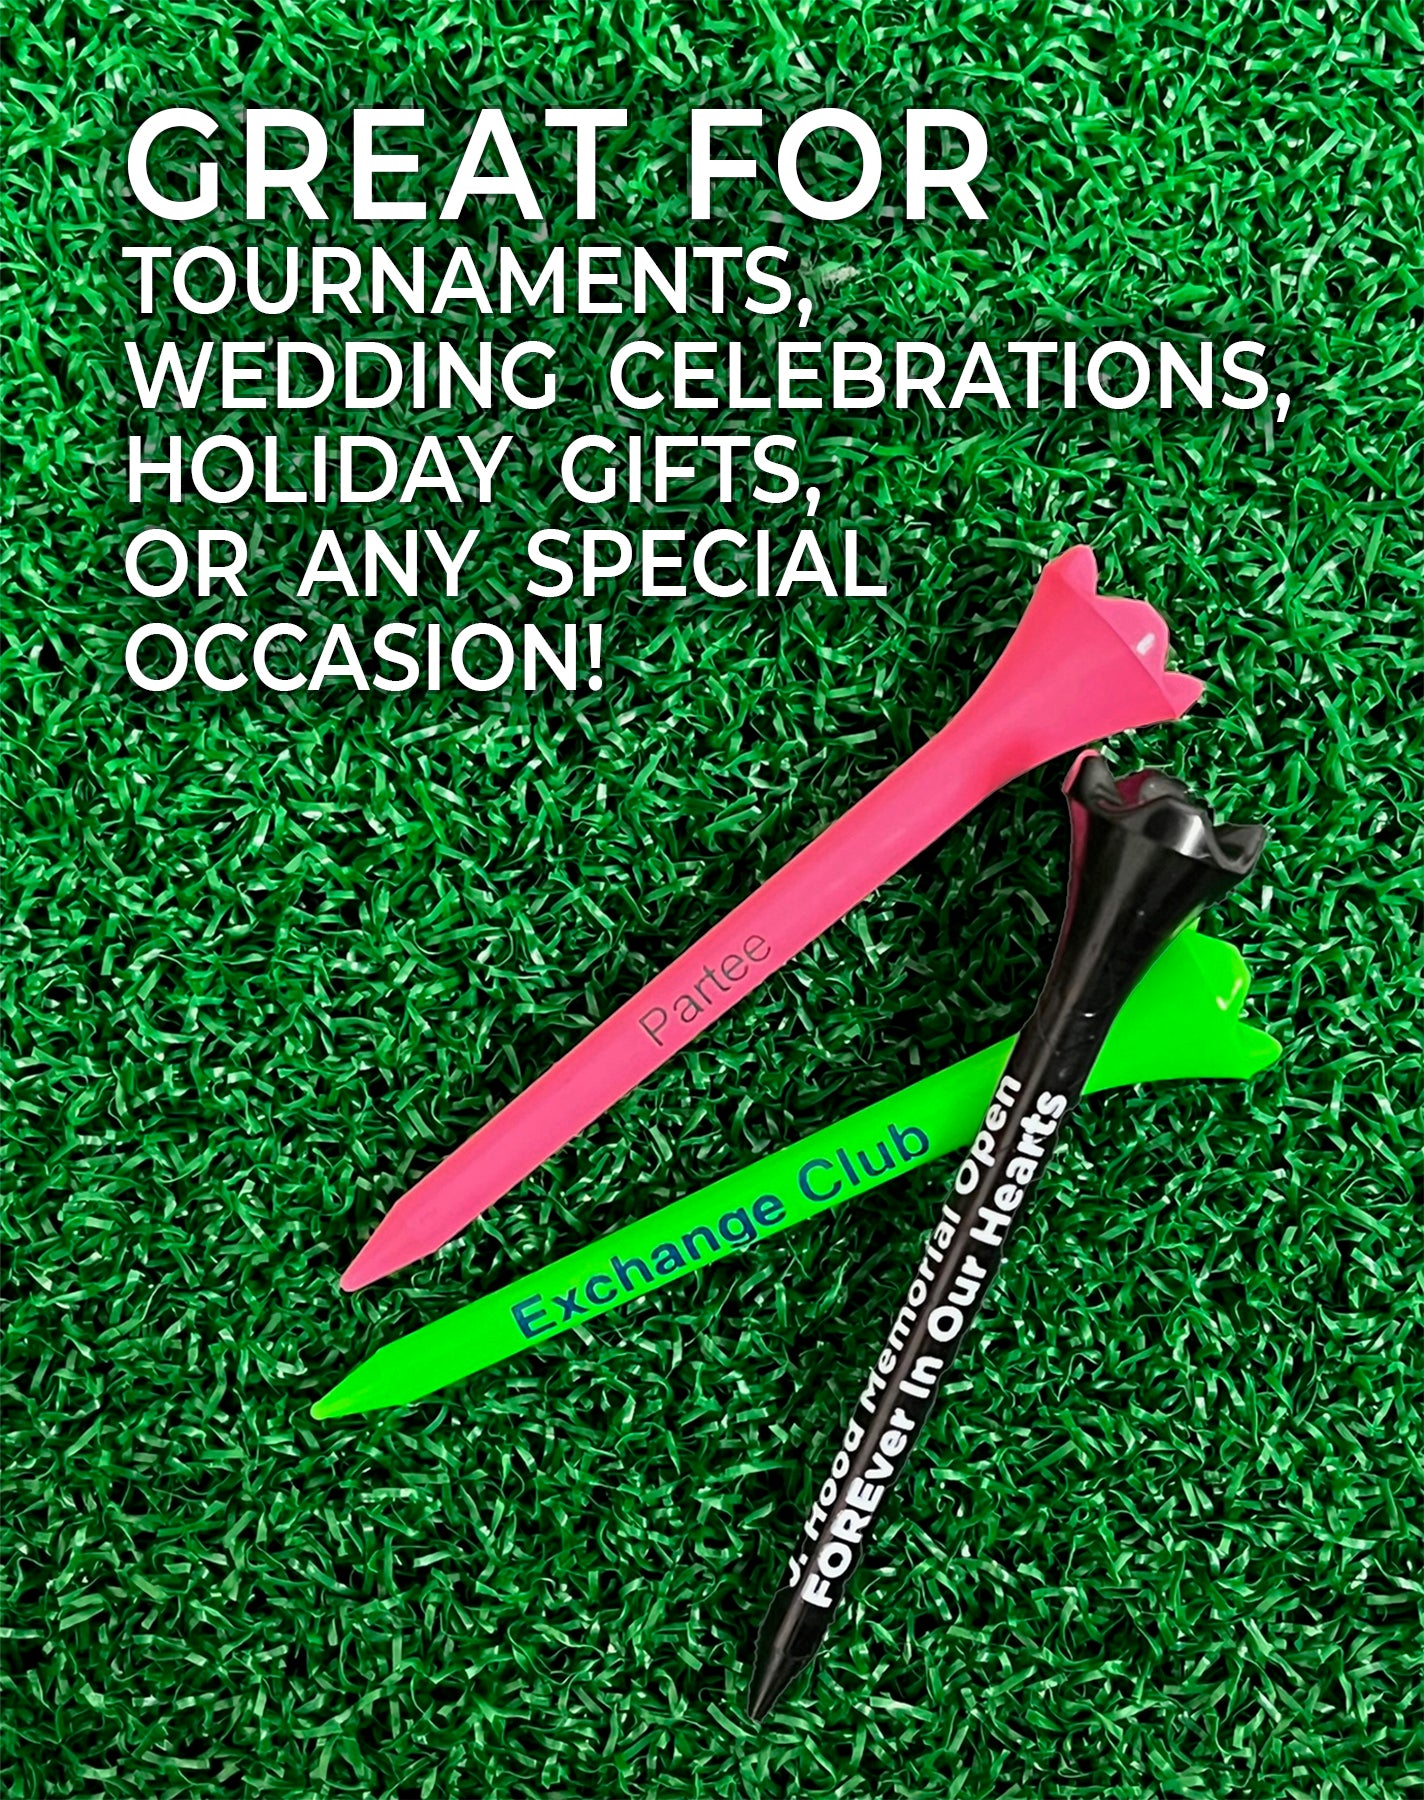 Personalized Pride Performance Combo Packs - 5 Tees, 2 Ball Markers, and 1 Divot Repair Tool